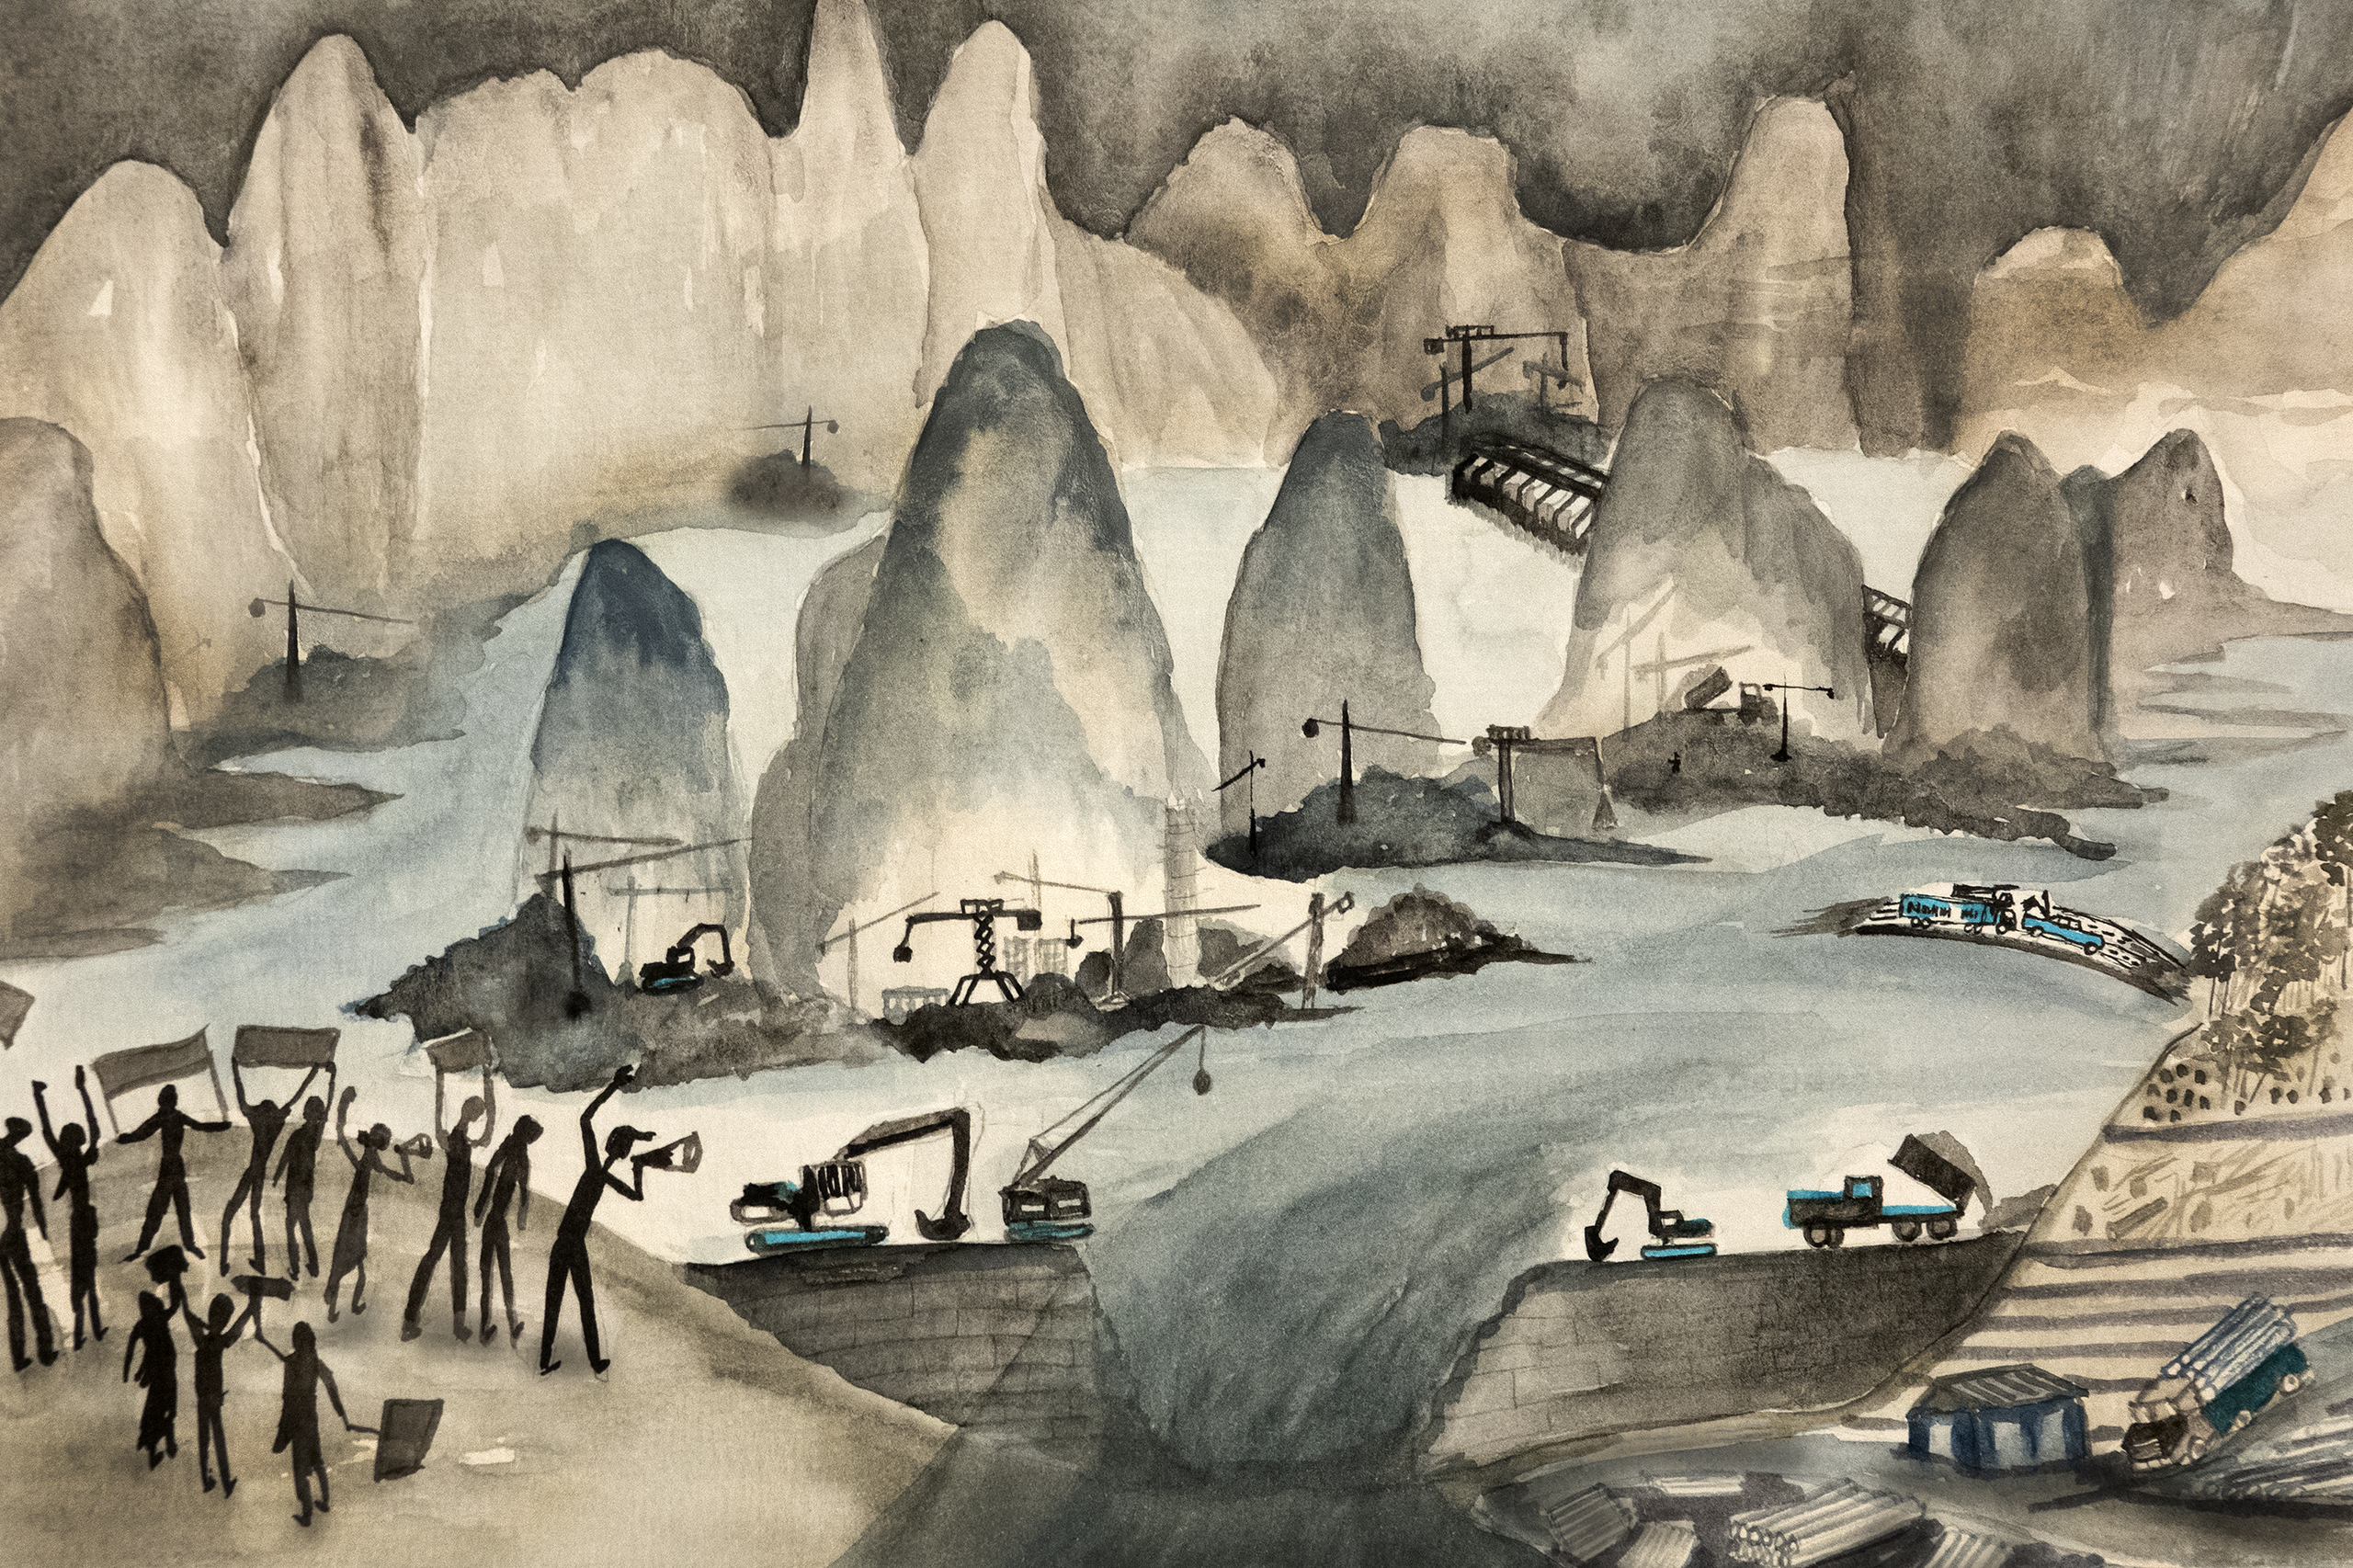 illustration depicts a dark future for the Mekong